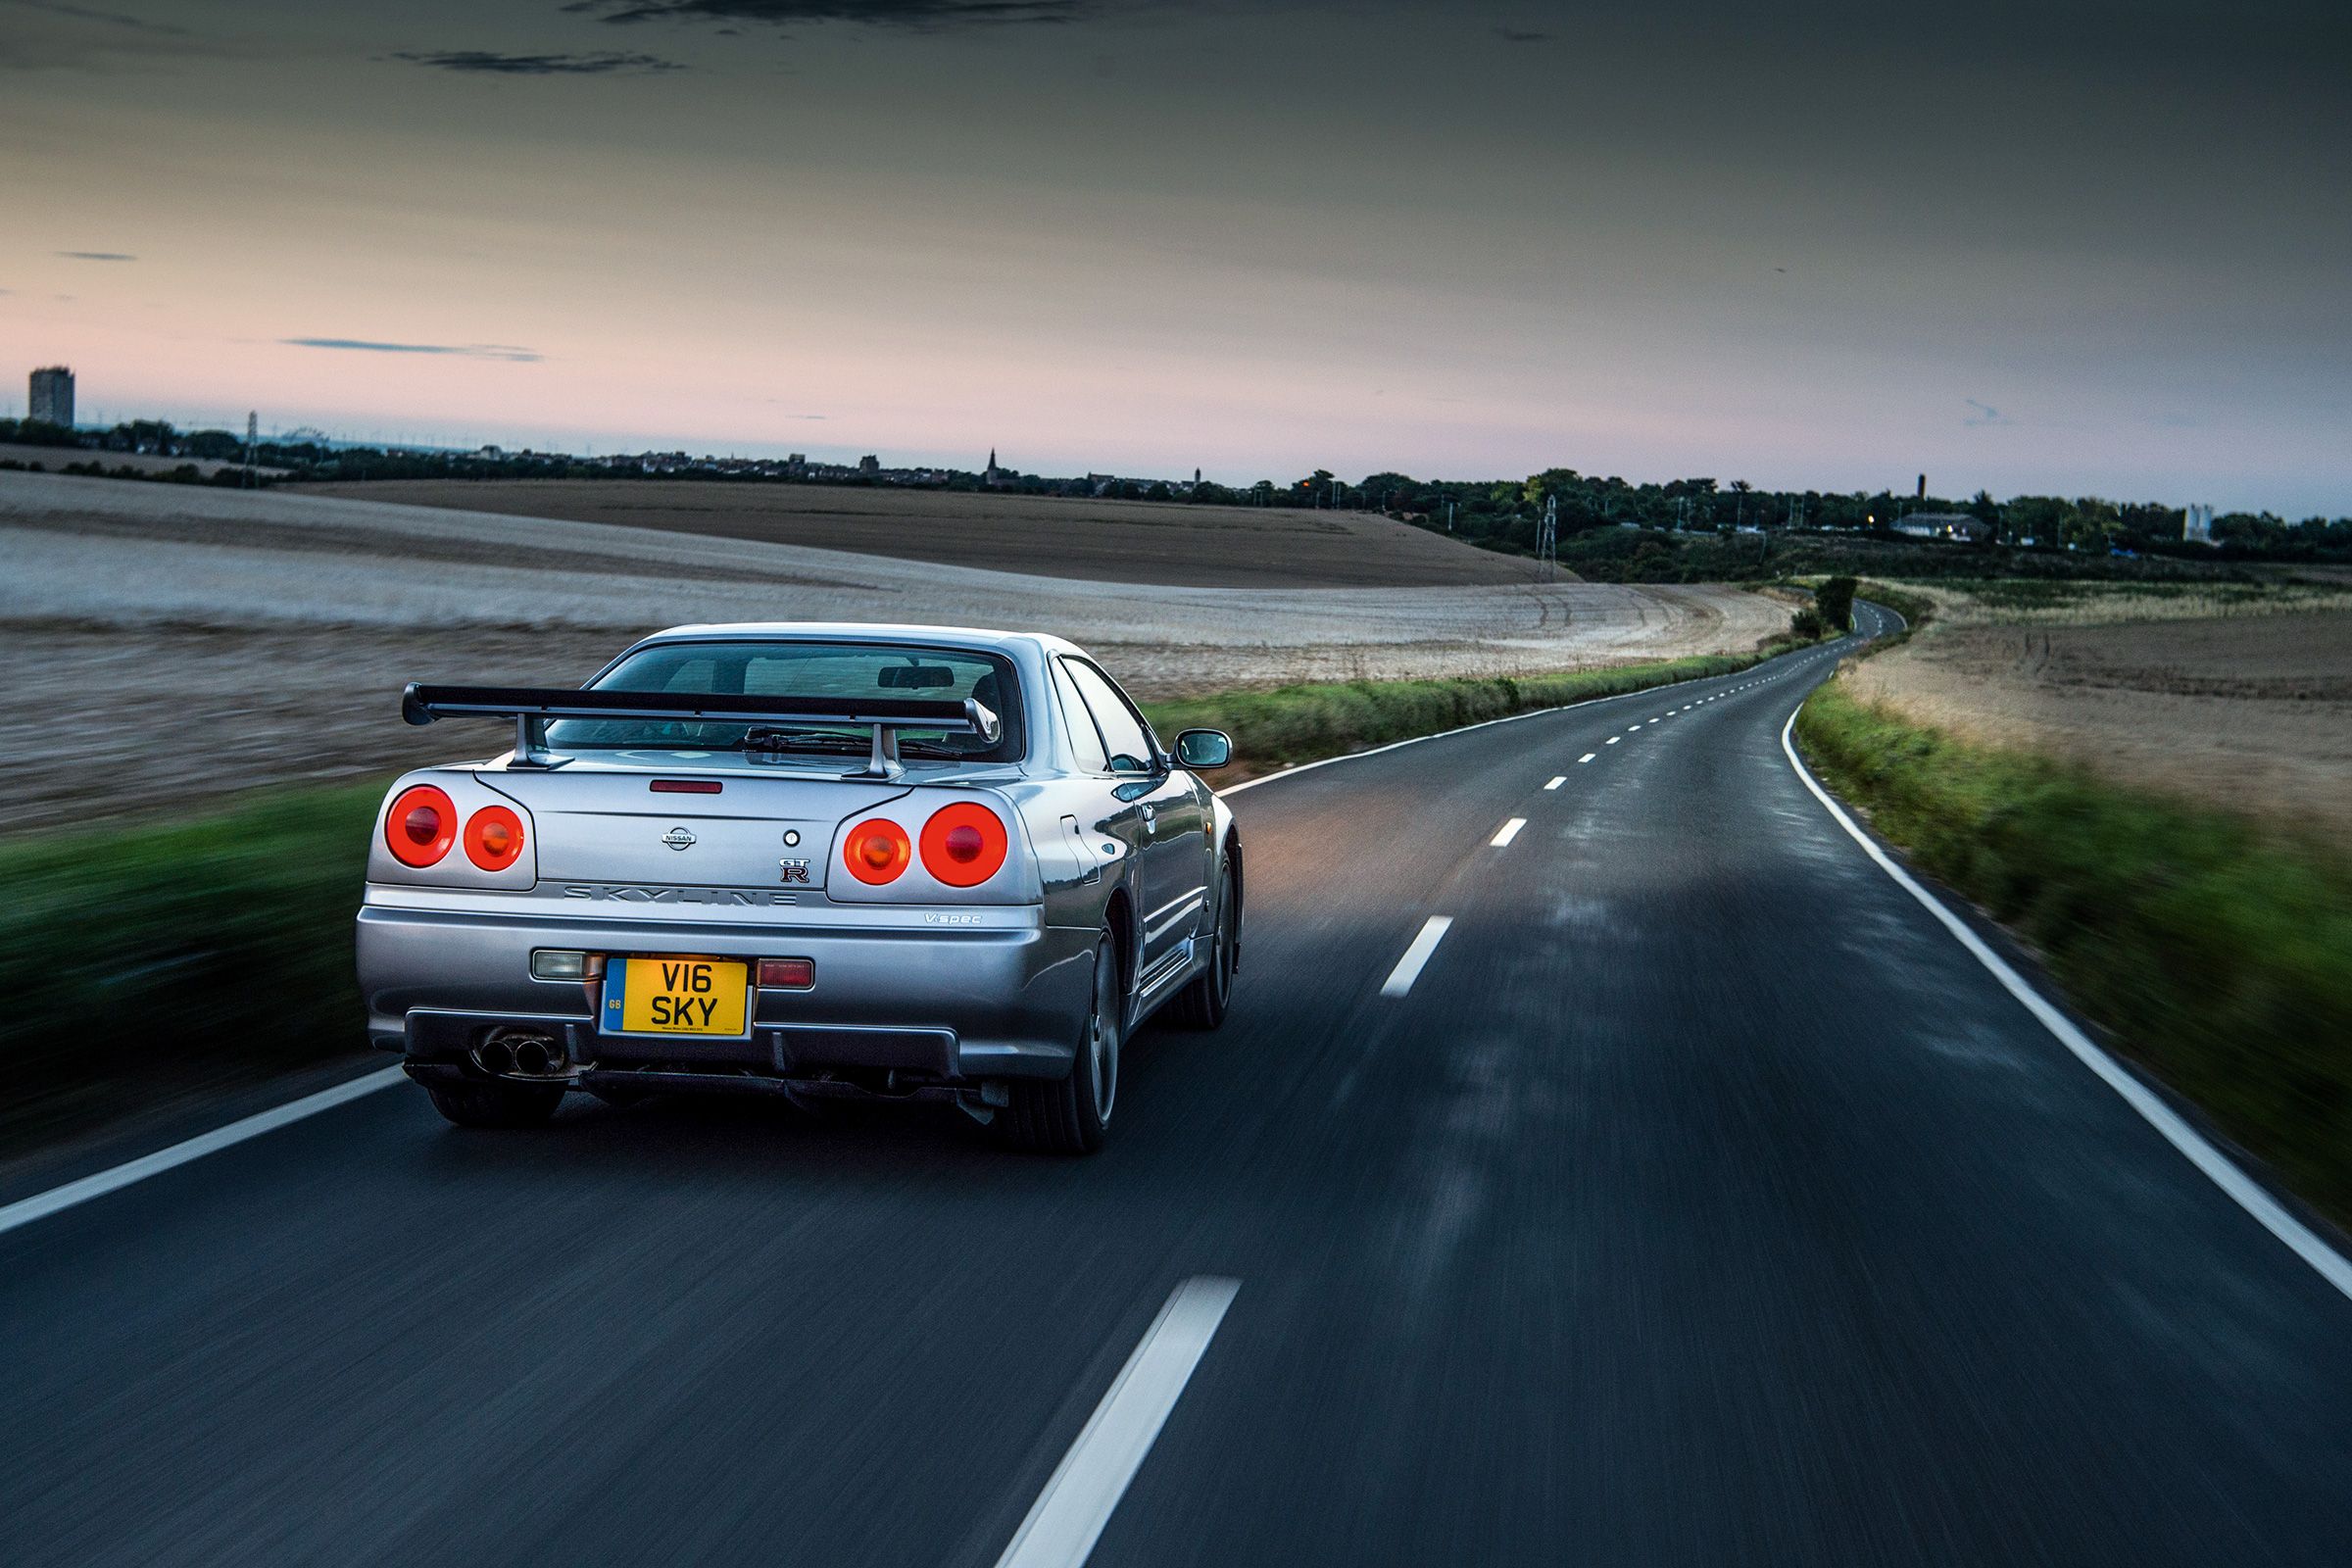 The R34's value is appreciating.